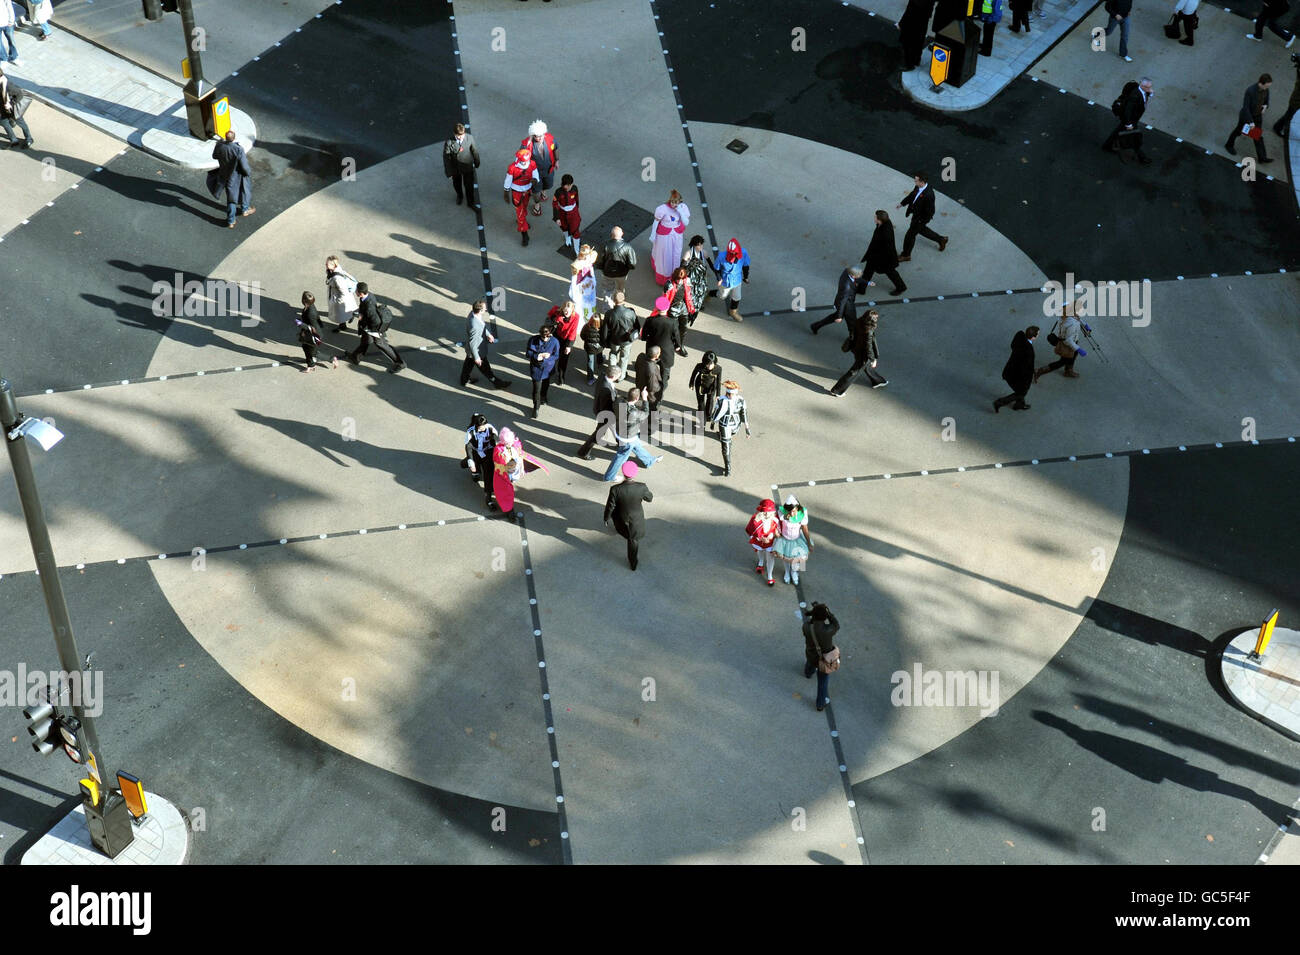 People use the new diagonal pedestrian crossing at Oxford Circus in London's West End, which was opened by Mayor of London, Boris Johnson, this morning. Stock Photo